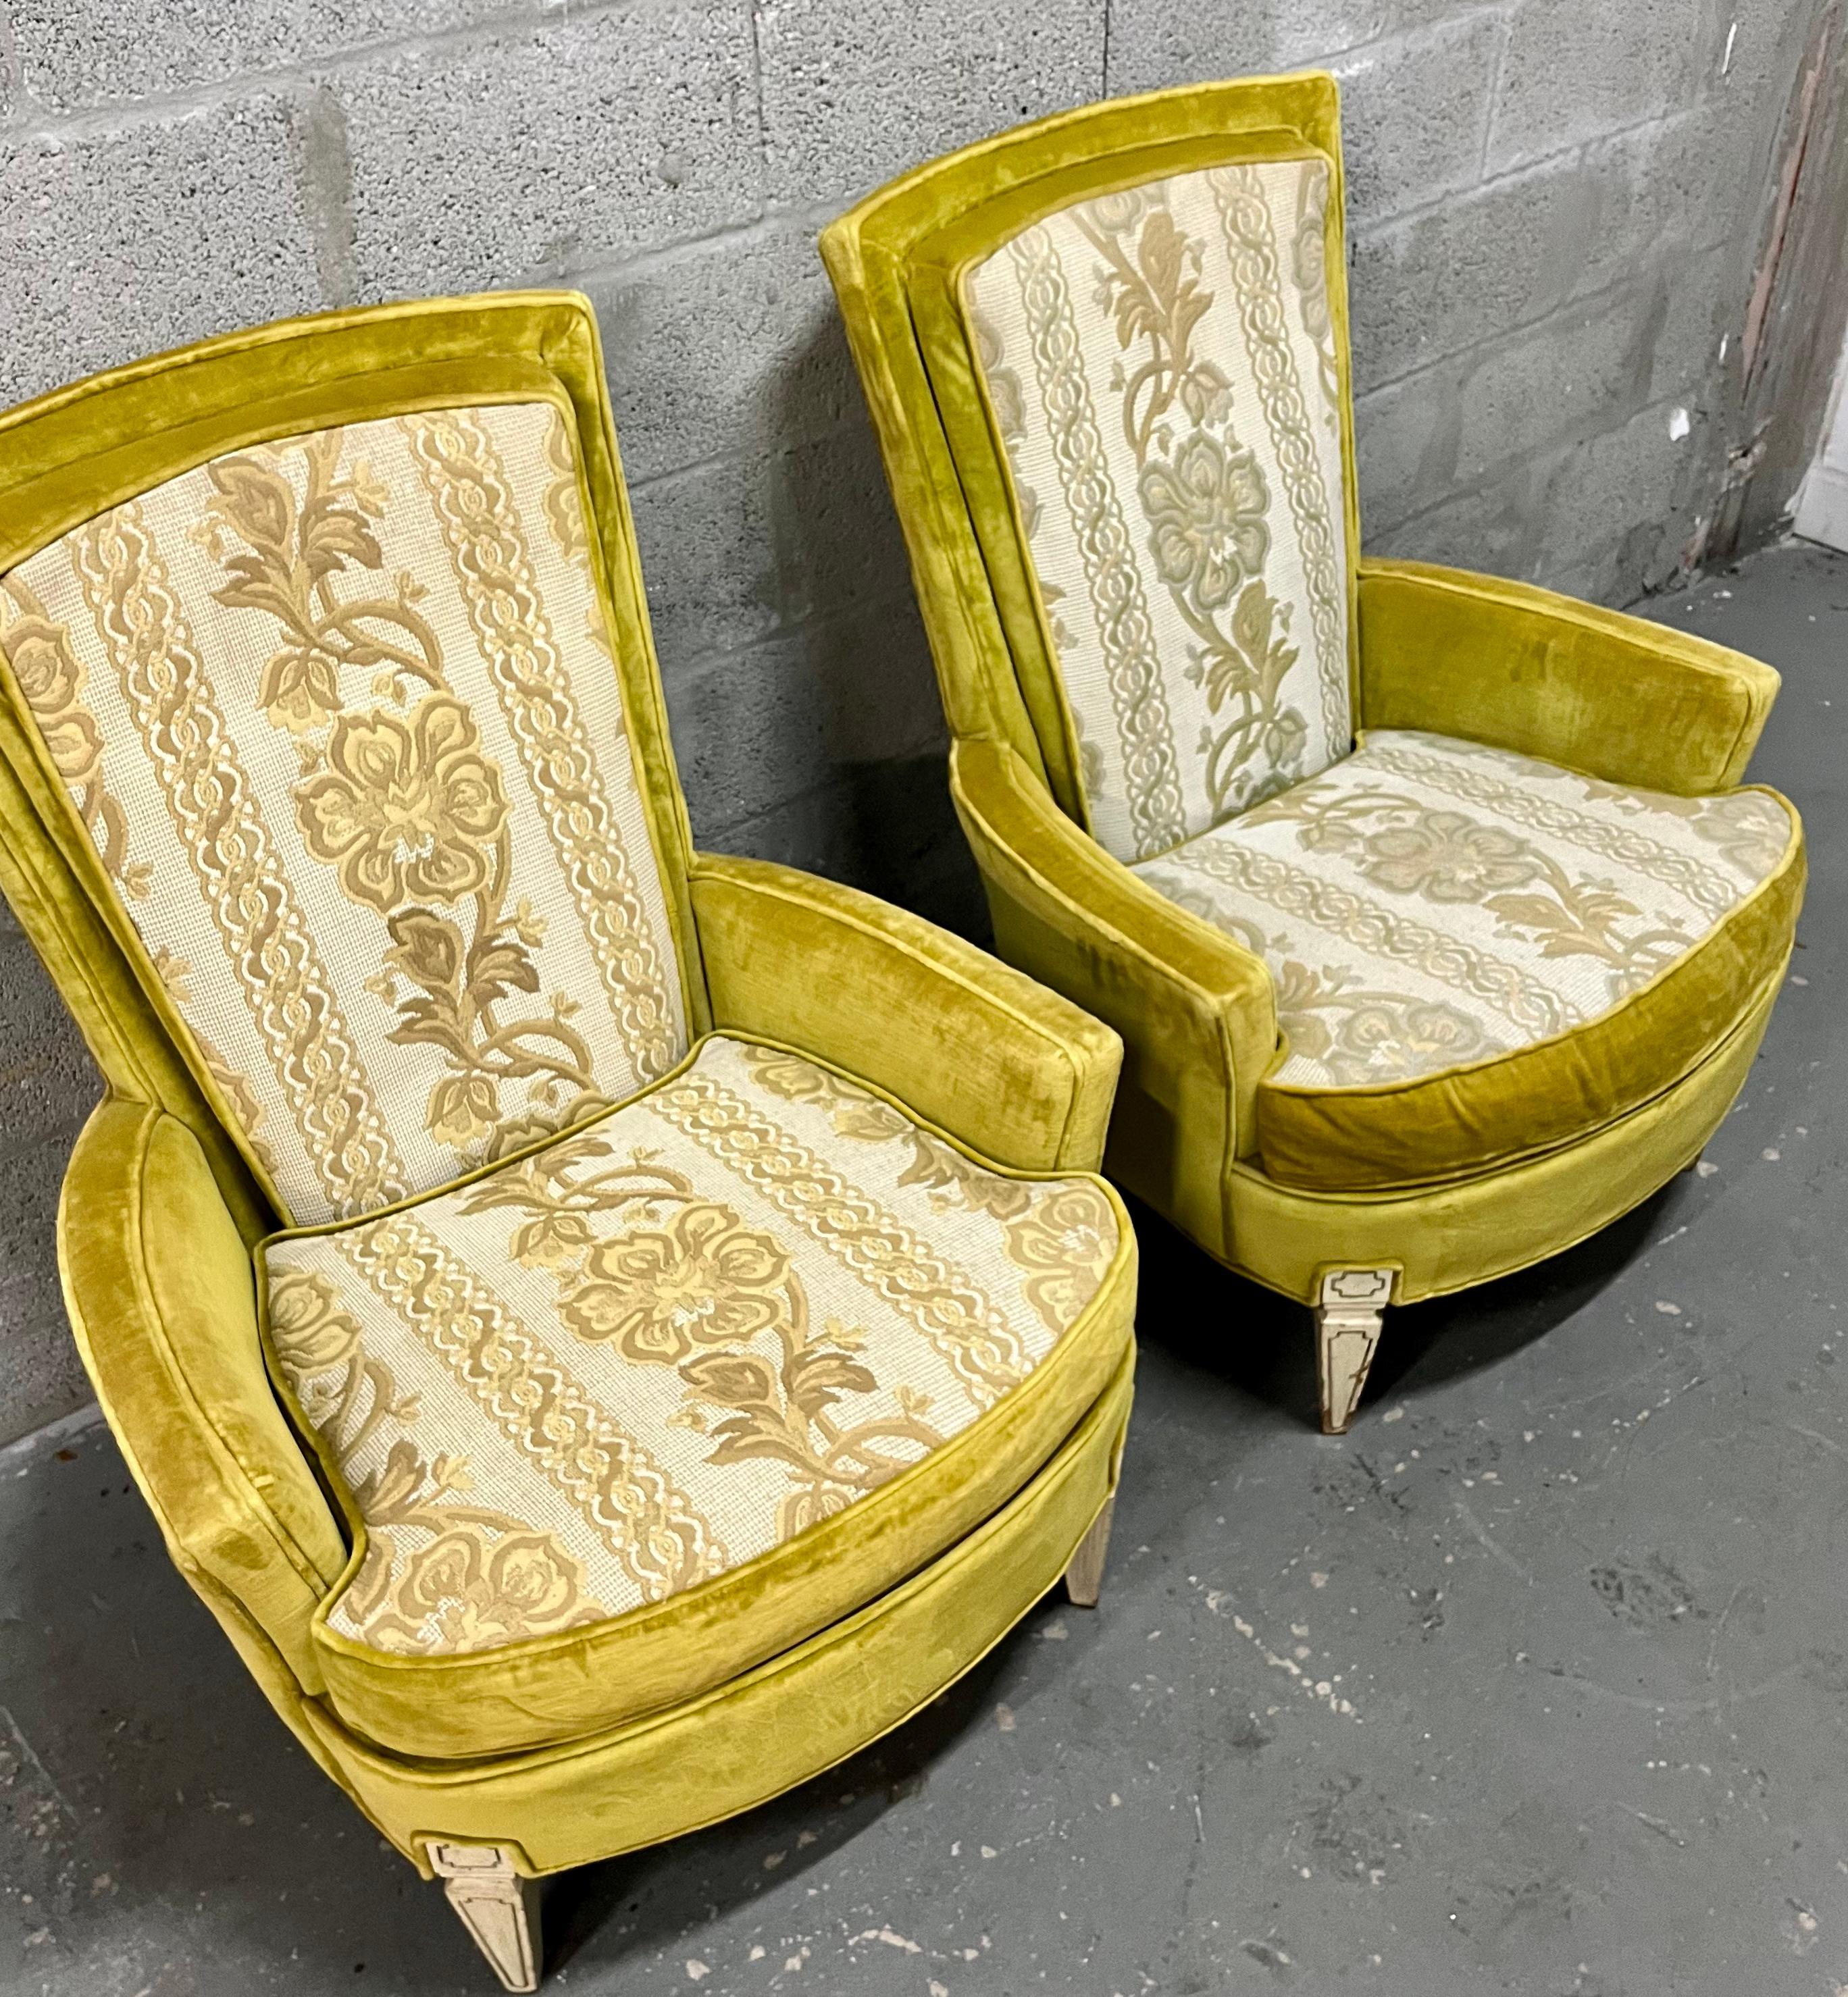 Mid-20th Century A Pair of Hollywood Regency Upholstered Lounge Chairs by Silver Craft. C. 1960s For Sale